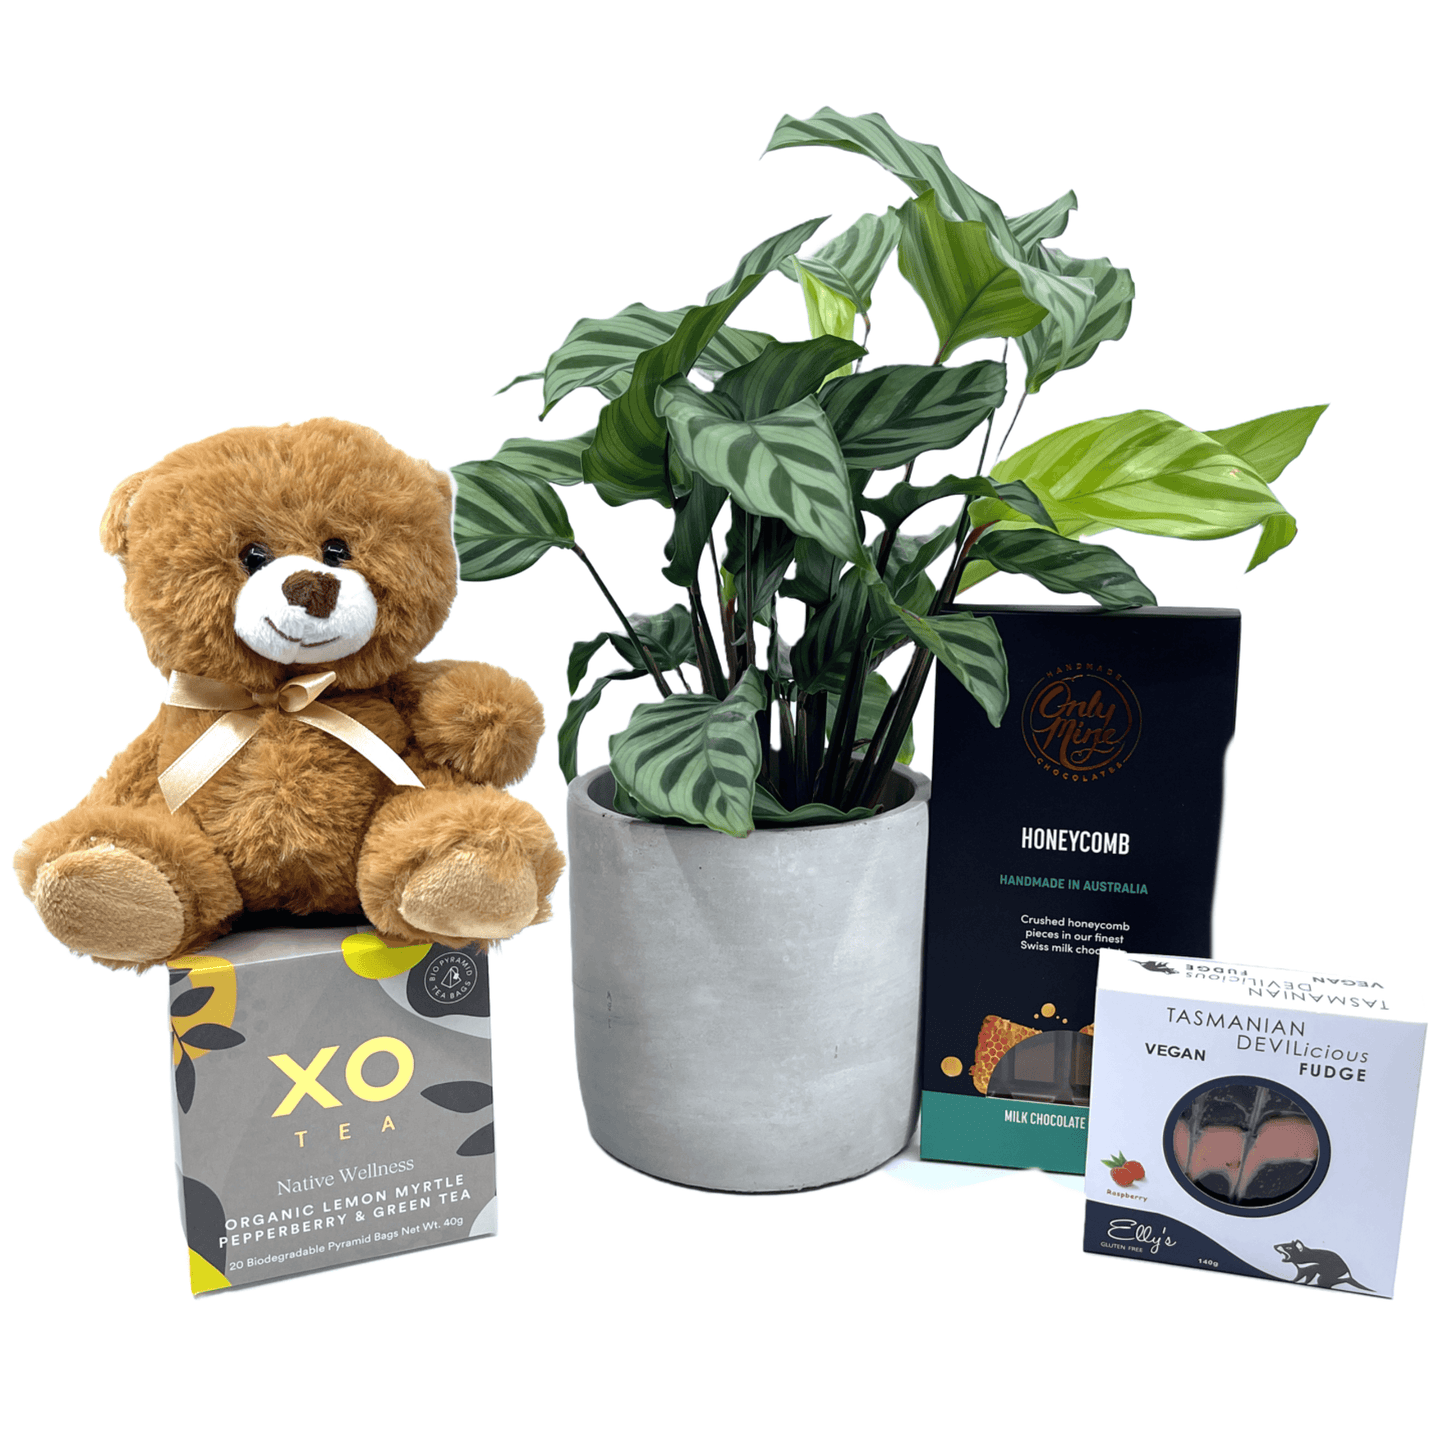 We Will Miss You Gift Box - The Plant Buddies